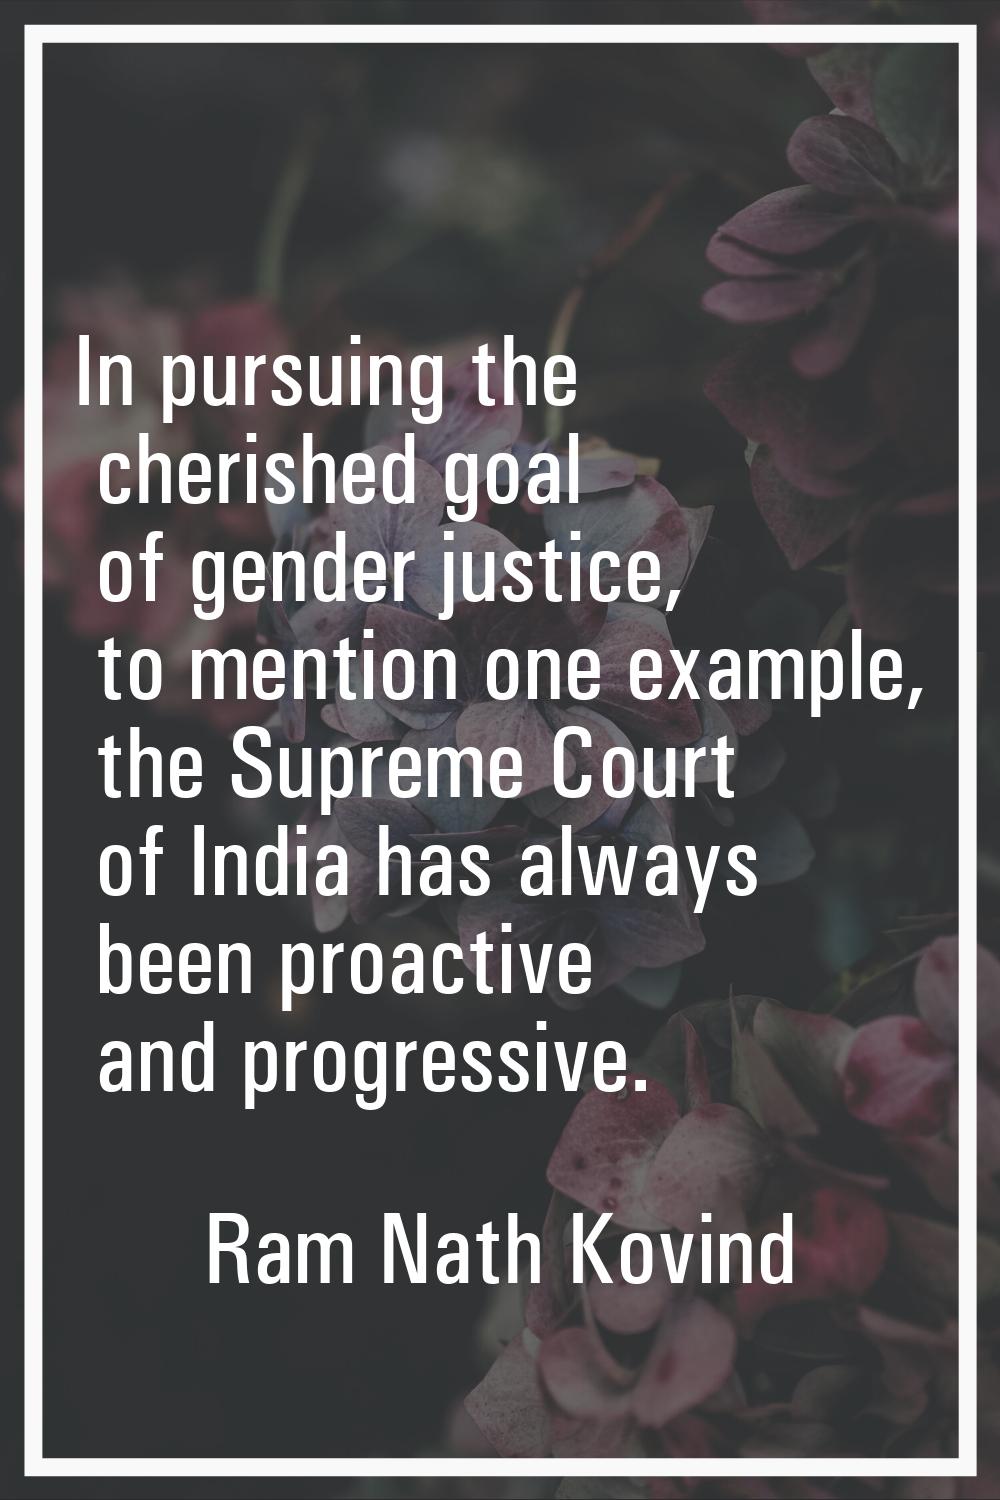 In pursuing the cherished goal of gender justice, to mention one example, the Supreme Court of Indi